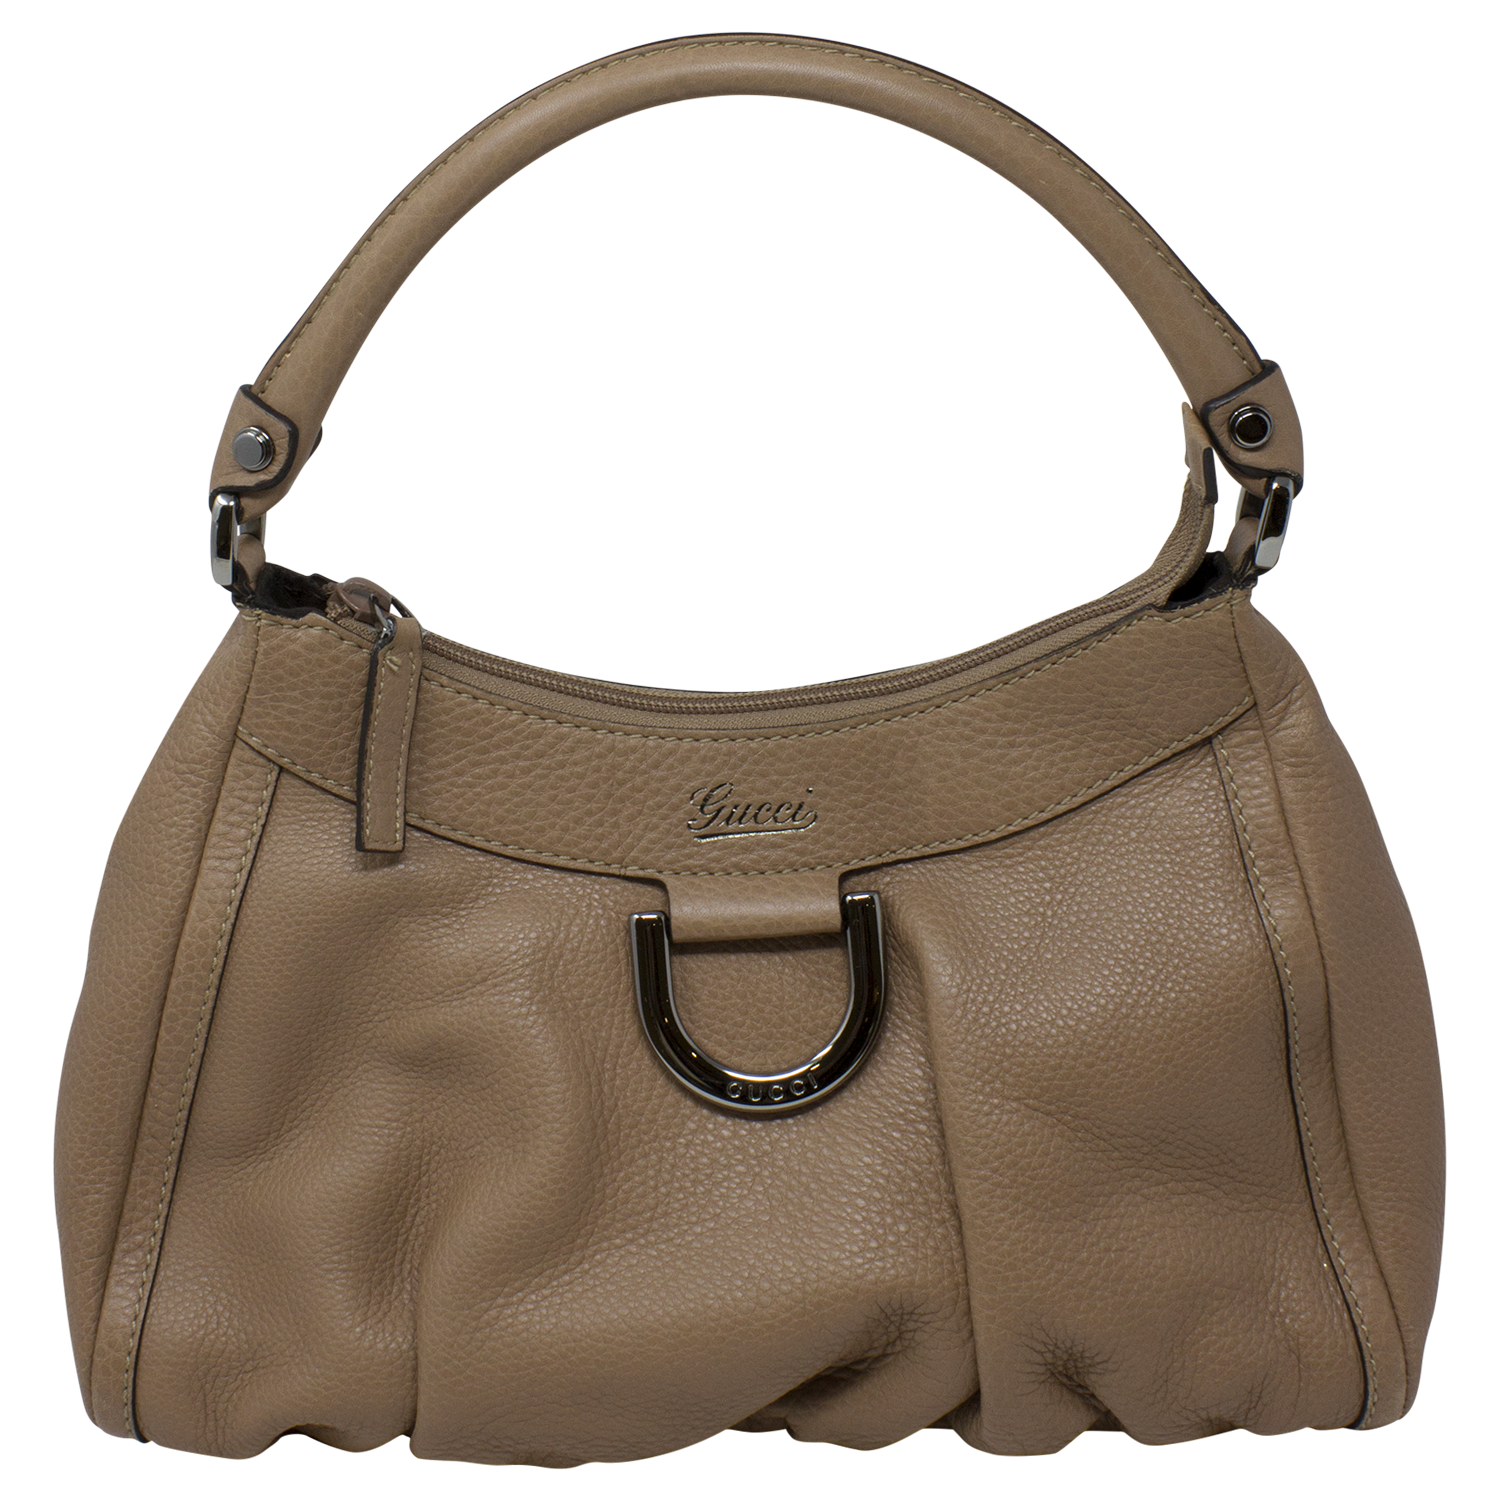 Gucci Taupe Grained Leather D Ring Shoulder Bag